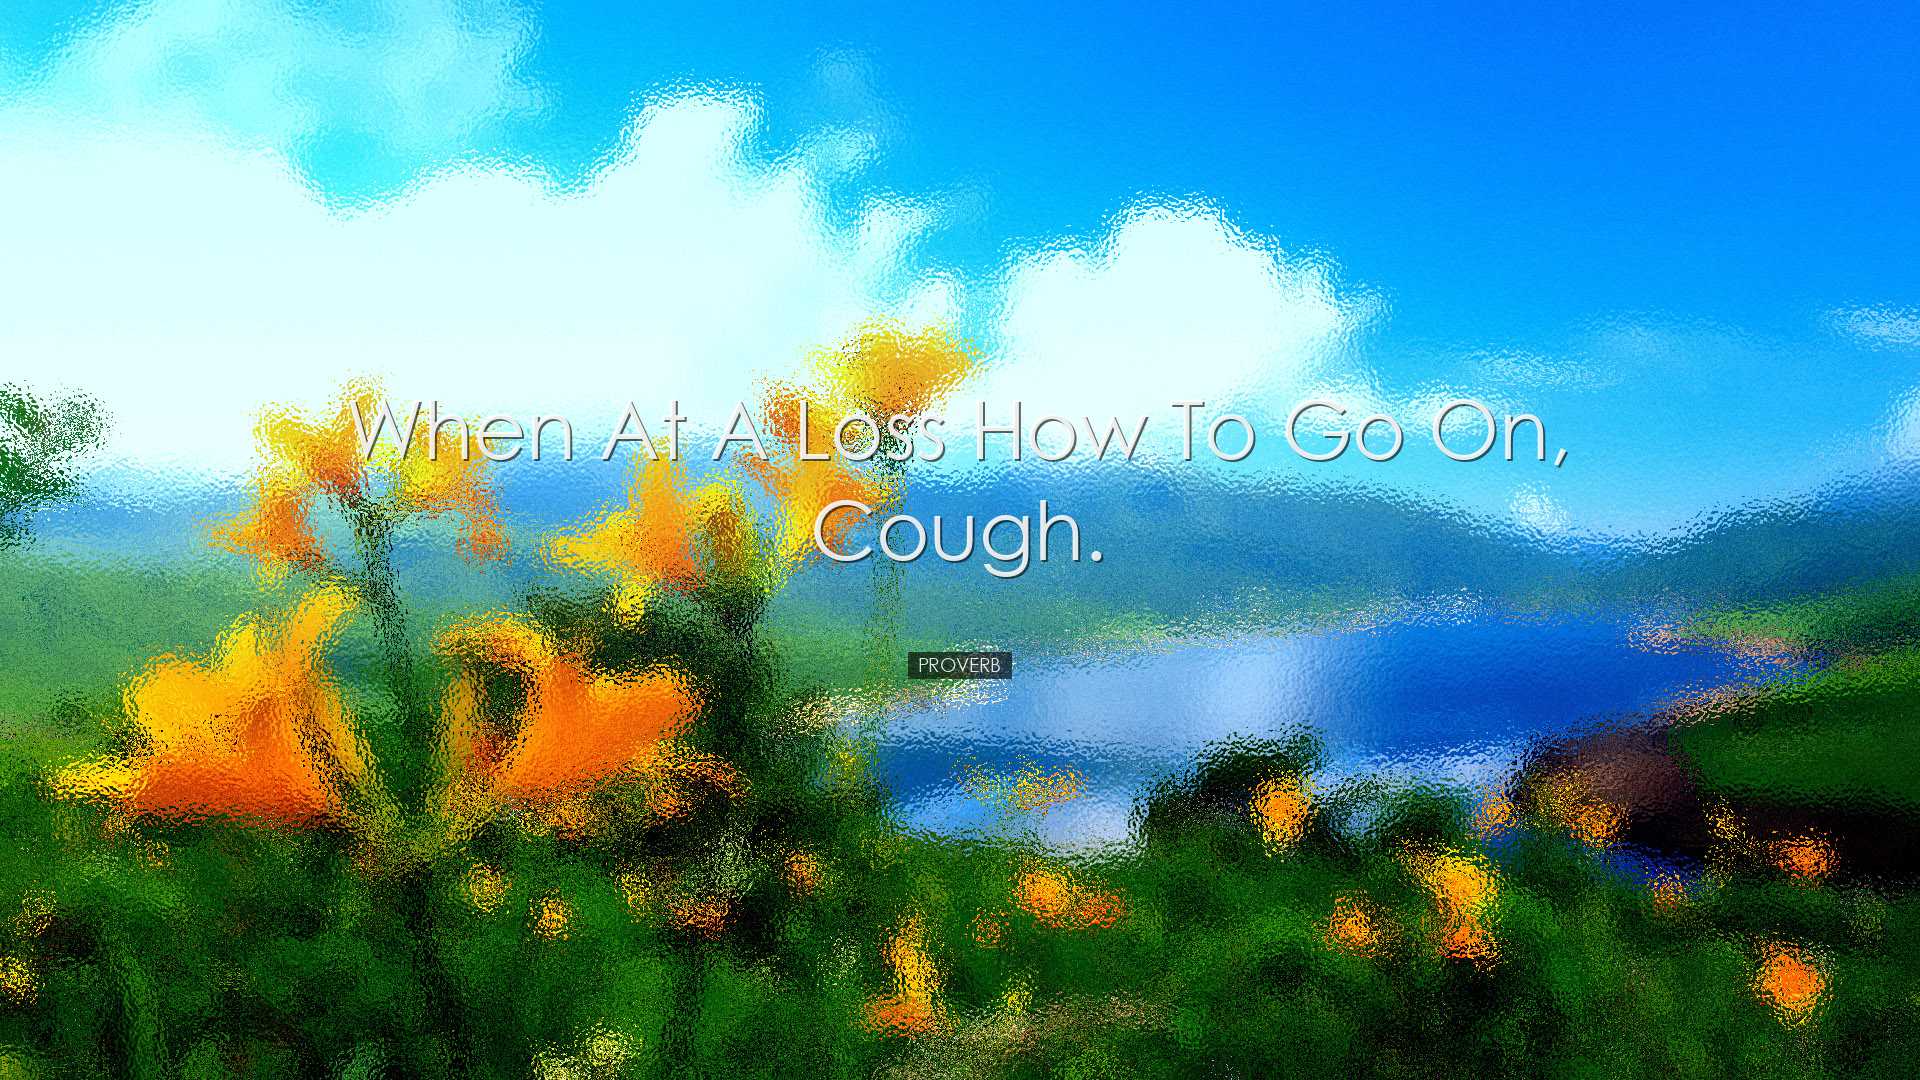 When at a loss how to go on, cough. - Proverb